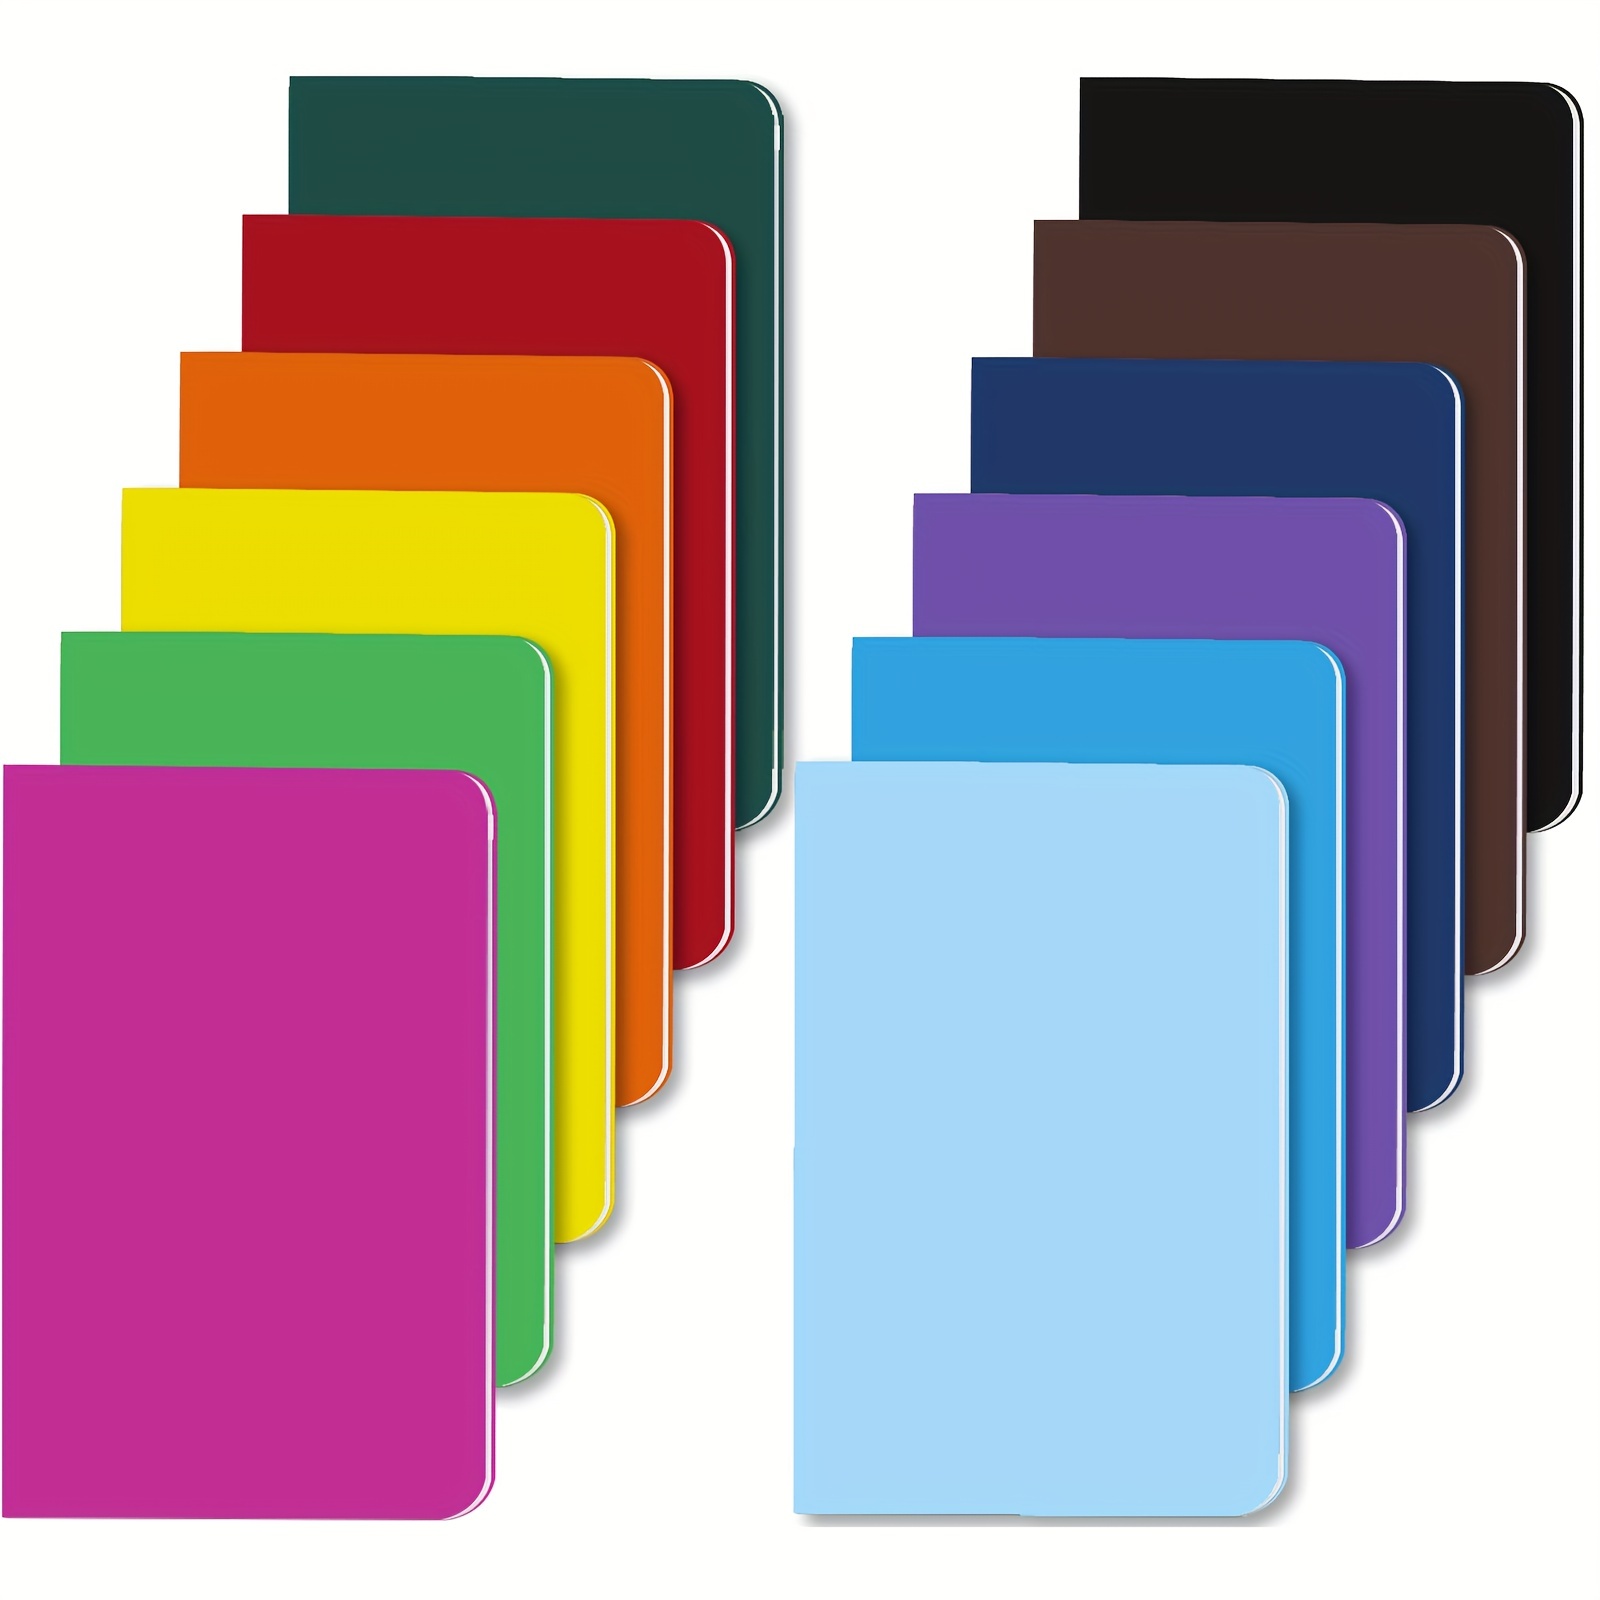 

12 Pack Mini Notebooks 3.5x5.5 In, Mini Journals Memo Notepads For Students, Small Pocket Notebook Set, 12 Colors For Students, Traveler, School Supplies, 3.5x5.5 Inches, 30 Sheets/60 Pages